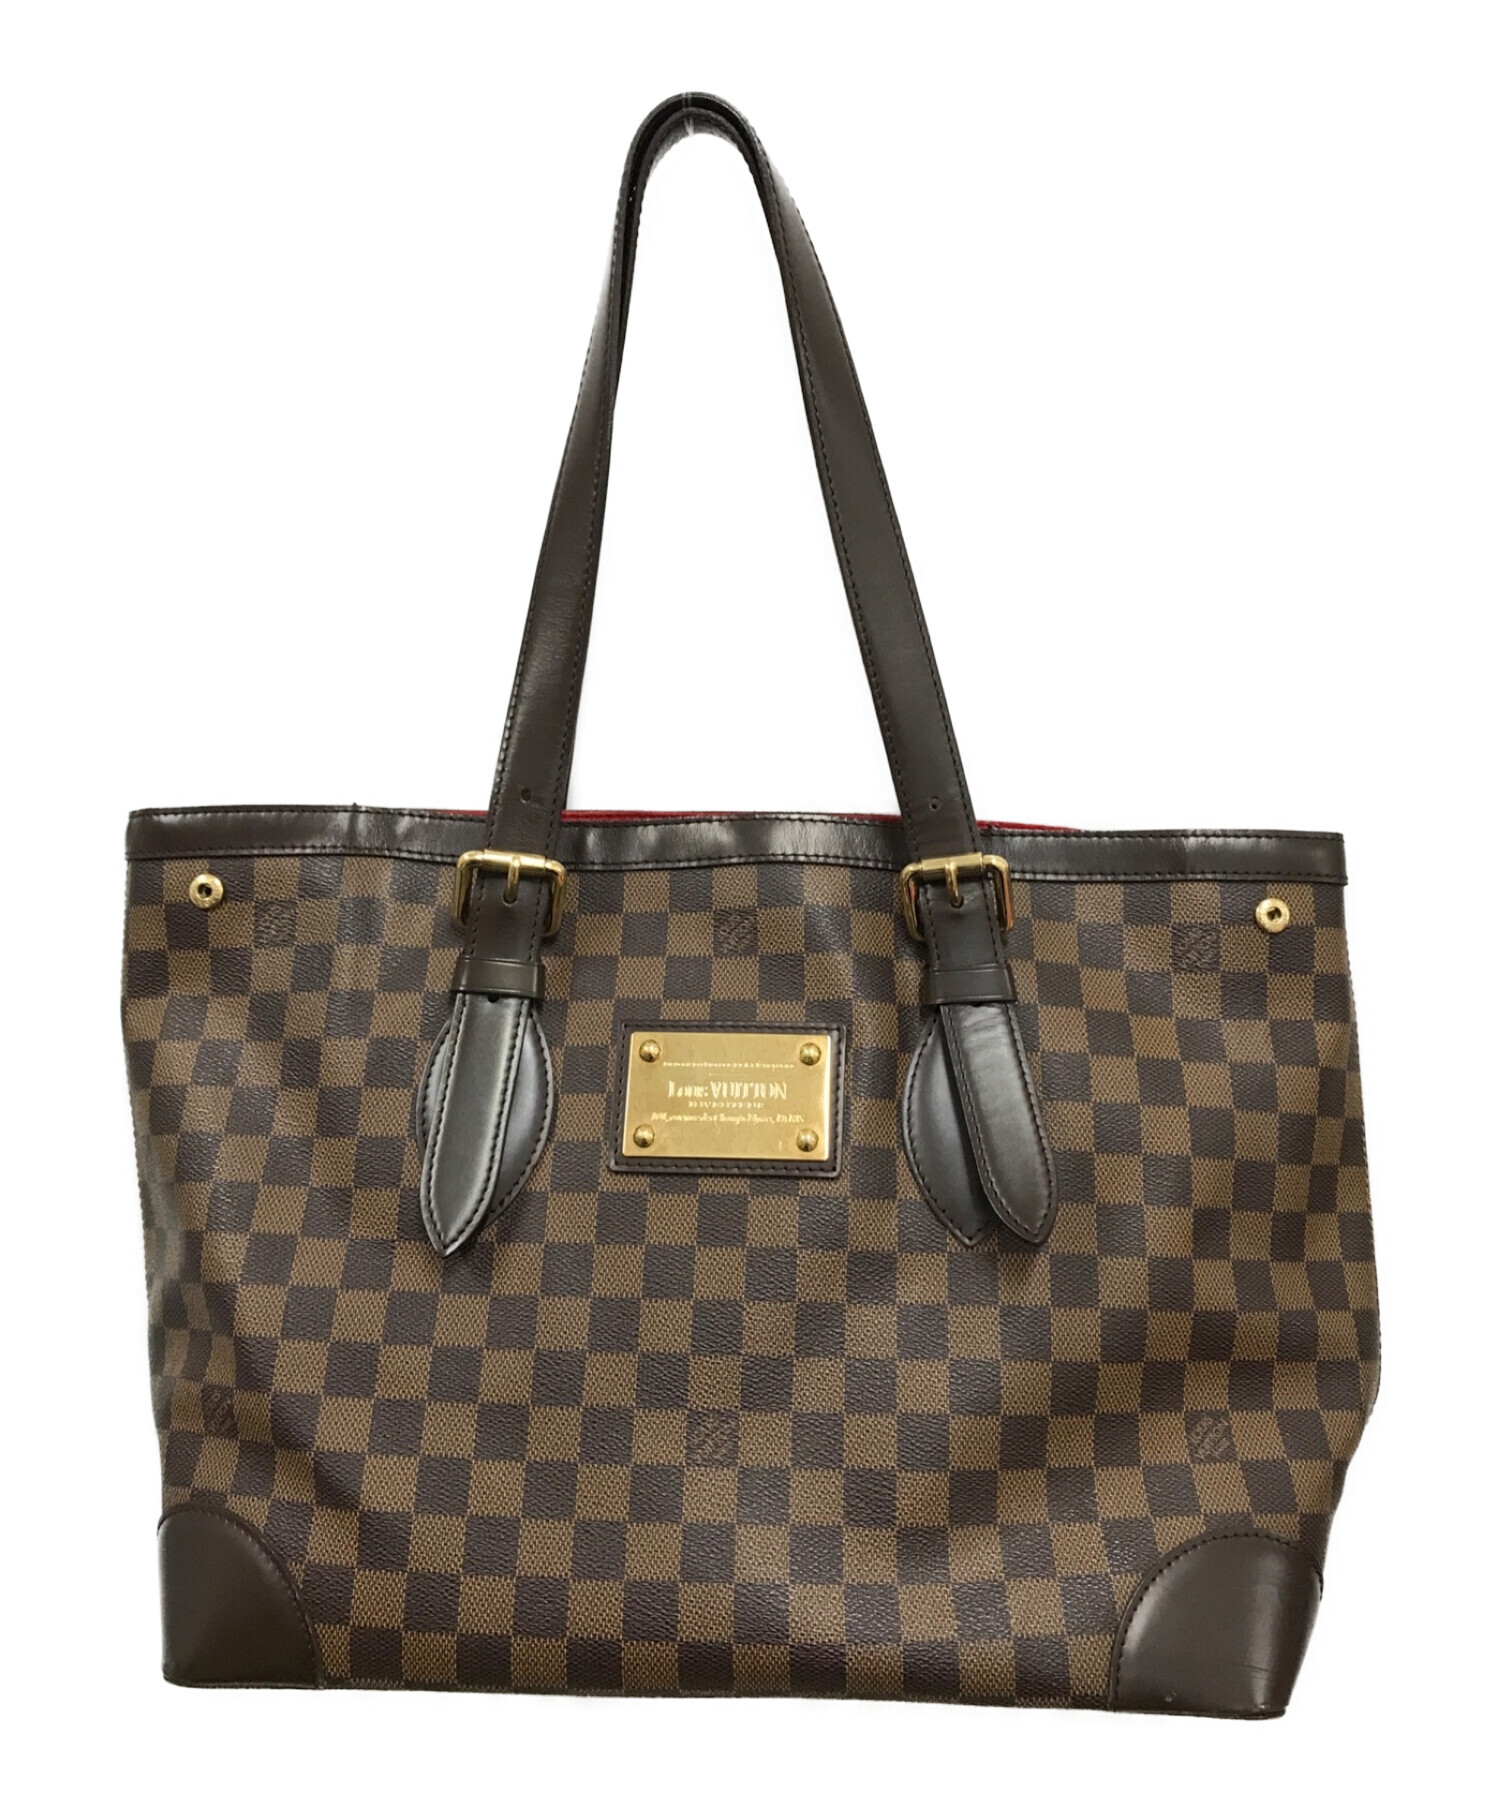 LOUIS VUITTON ルイヴィトン ダミエ ハムステッドPM トートバッグ N51205 ブラウン by